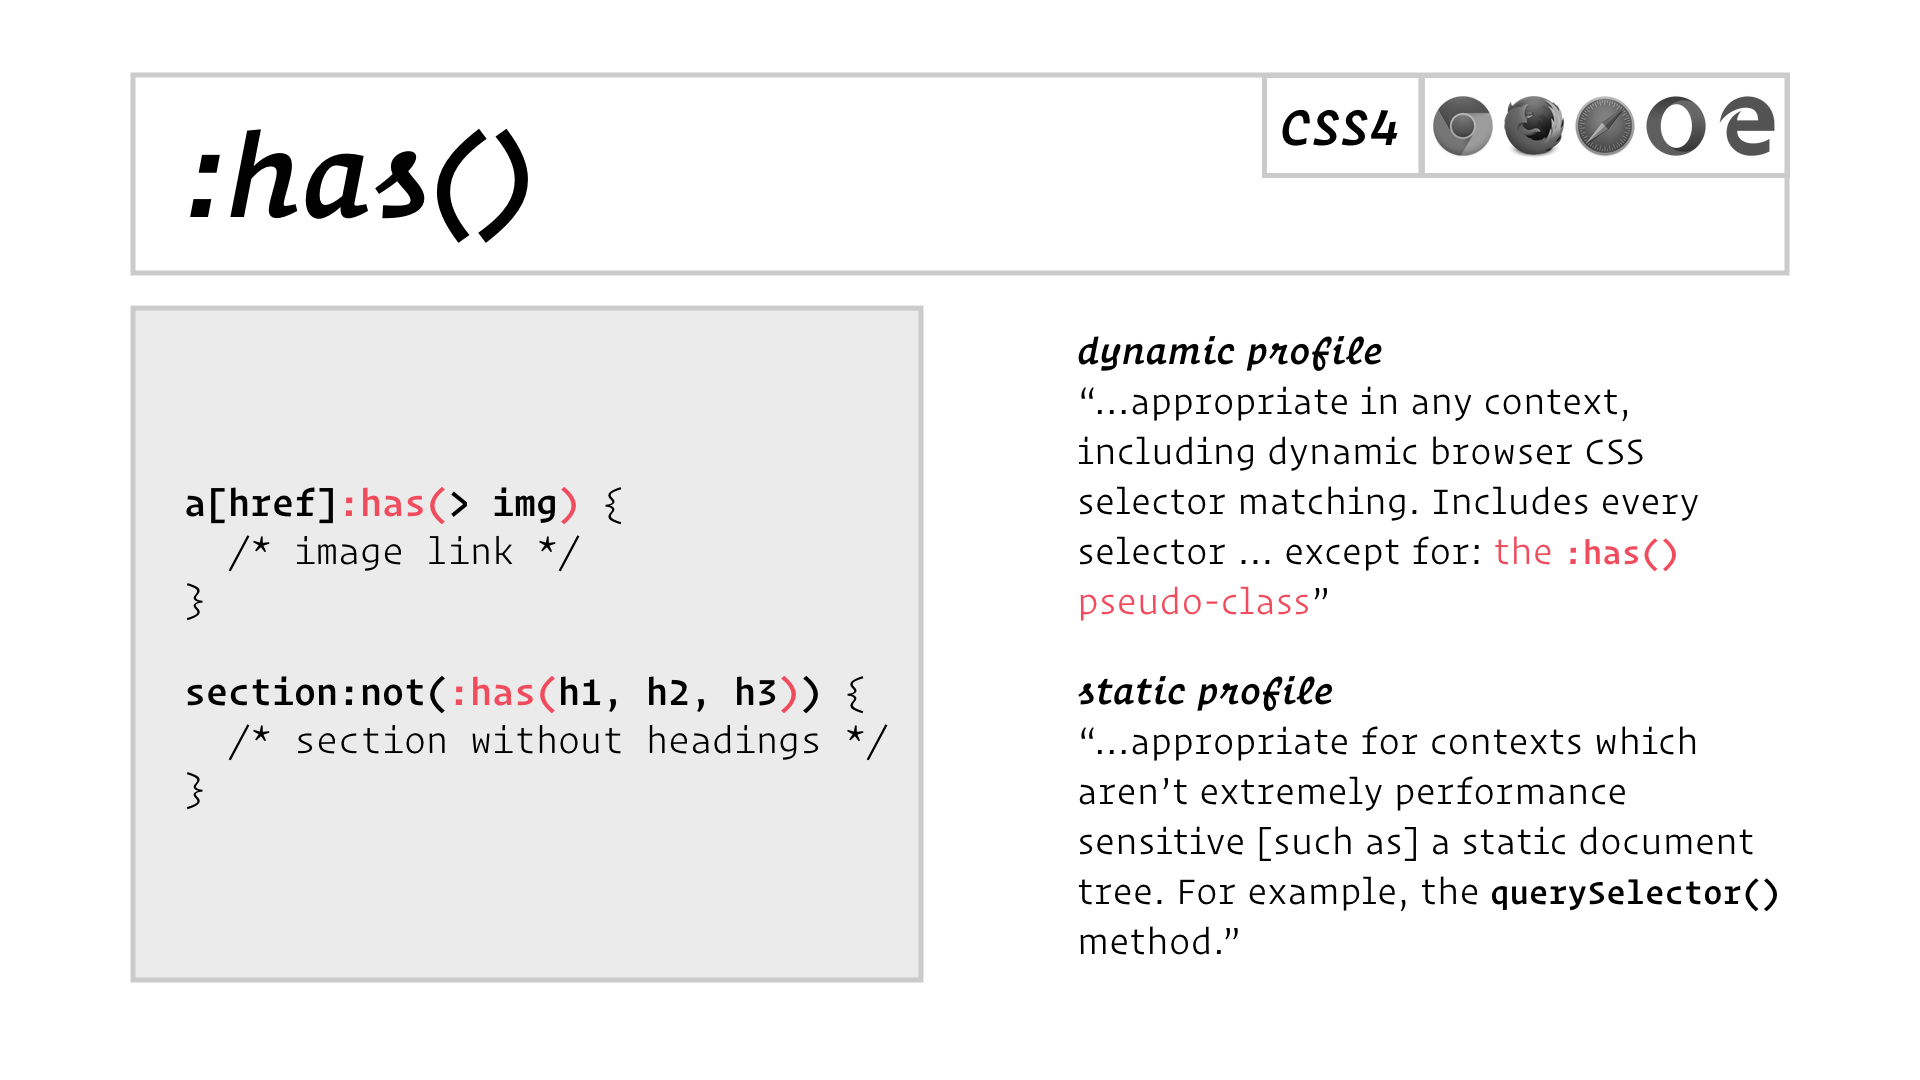 slide: Dynamic profile: “…appropriate in any context, including dynamic browser CSS selector matching. Includes every selector … except for: the :has() pseudo-class” Static profile: “…appropriate for contexts which aren’t extremely performance sensitive [such as] a static document tree. For example, the querySelector() method.”